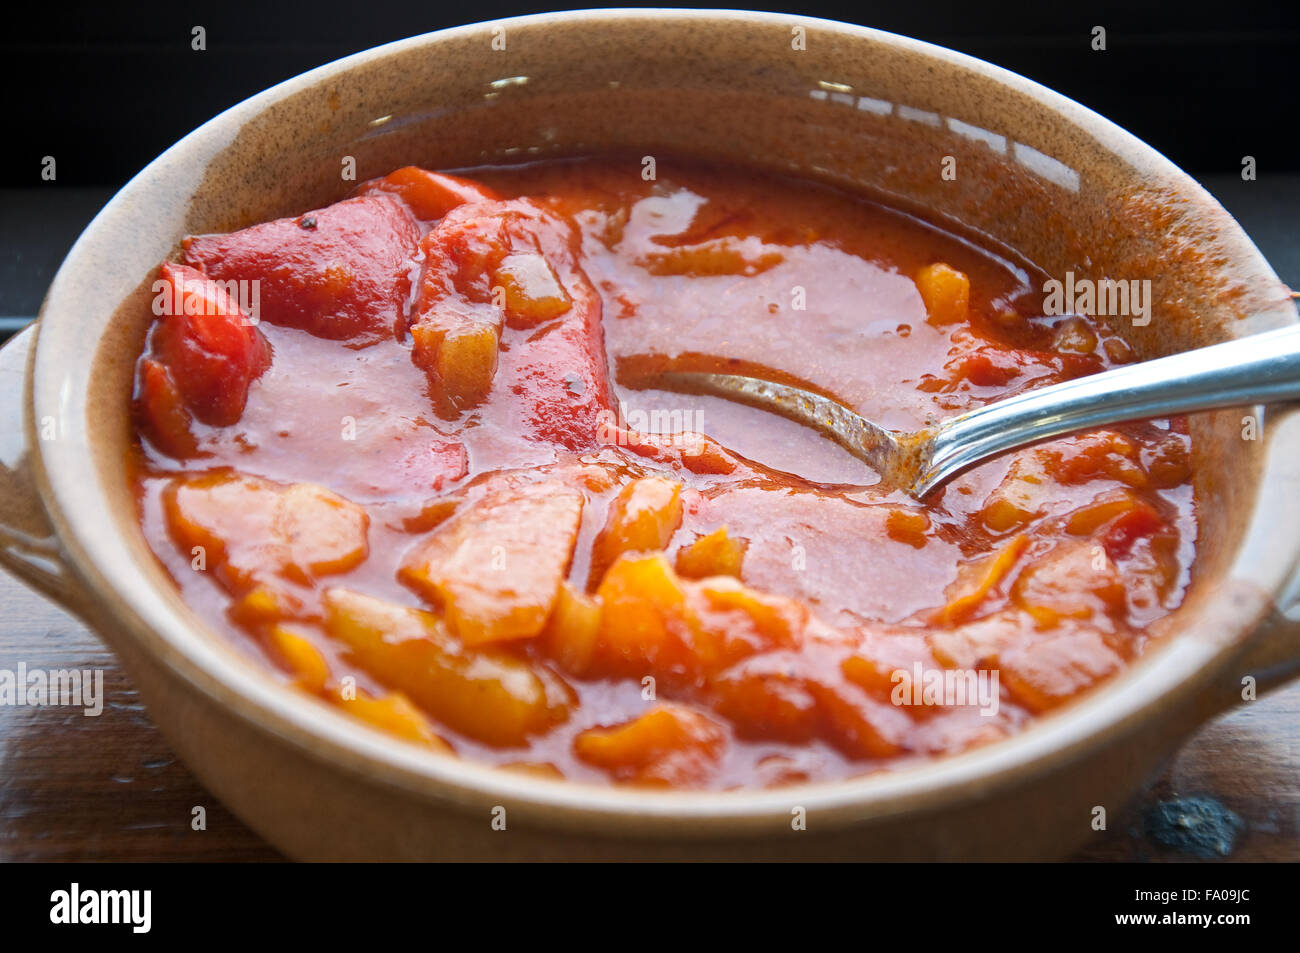 Pepper sauce typical of piedmont who approaches the boiled meat,italy Stock Photo